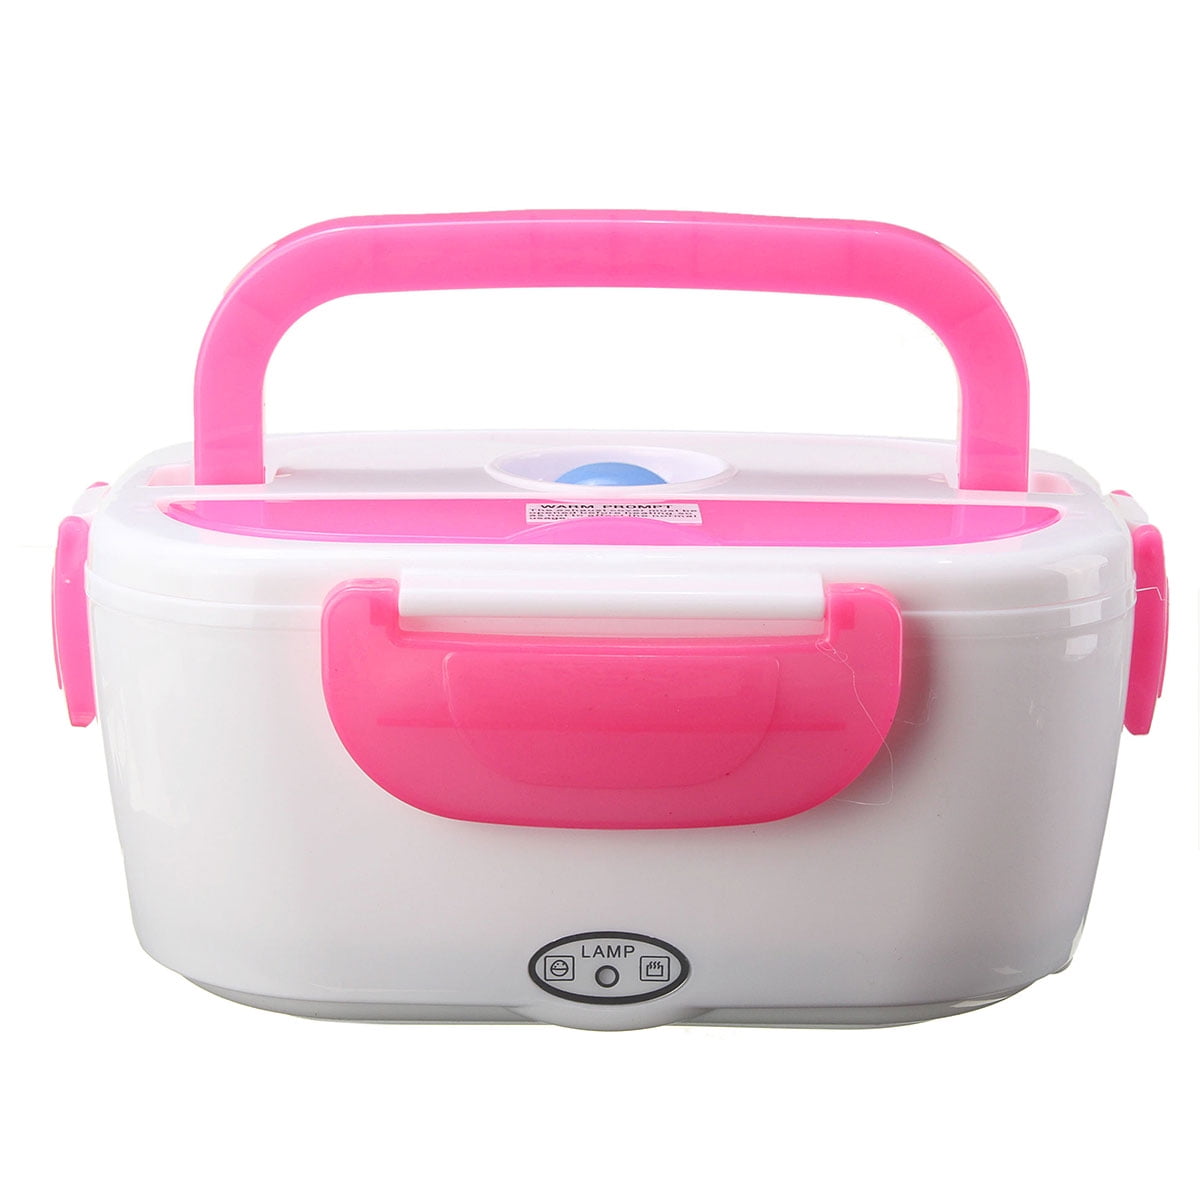 BEVCEKNS Portable Upgraded 80W Food Heater Lunch Box, Fits All Outlets,  Pink (Model: BEV-80W-P) With…See more BEVCEKNS Portable Upgraded 80W Food